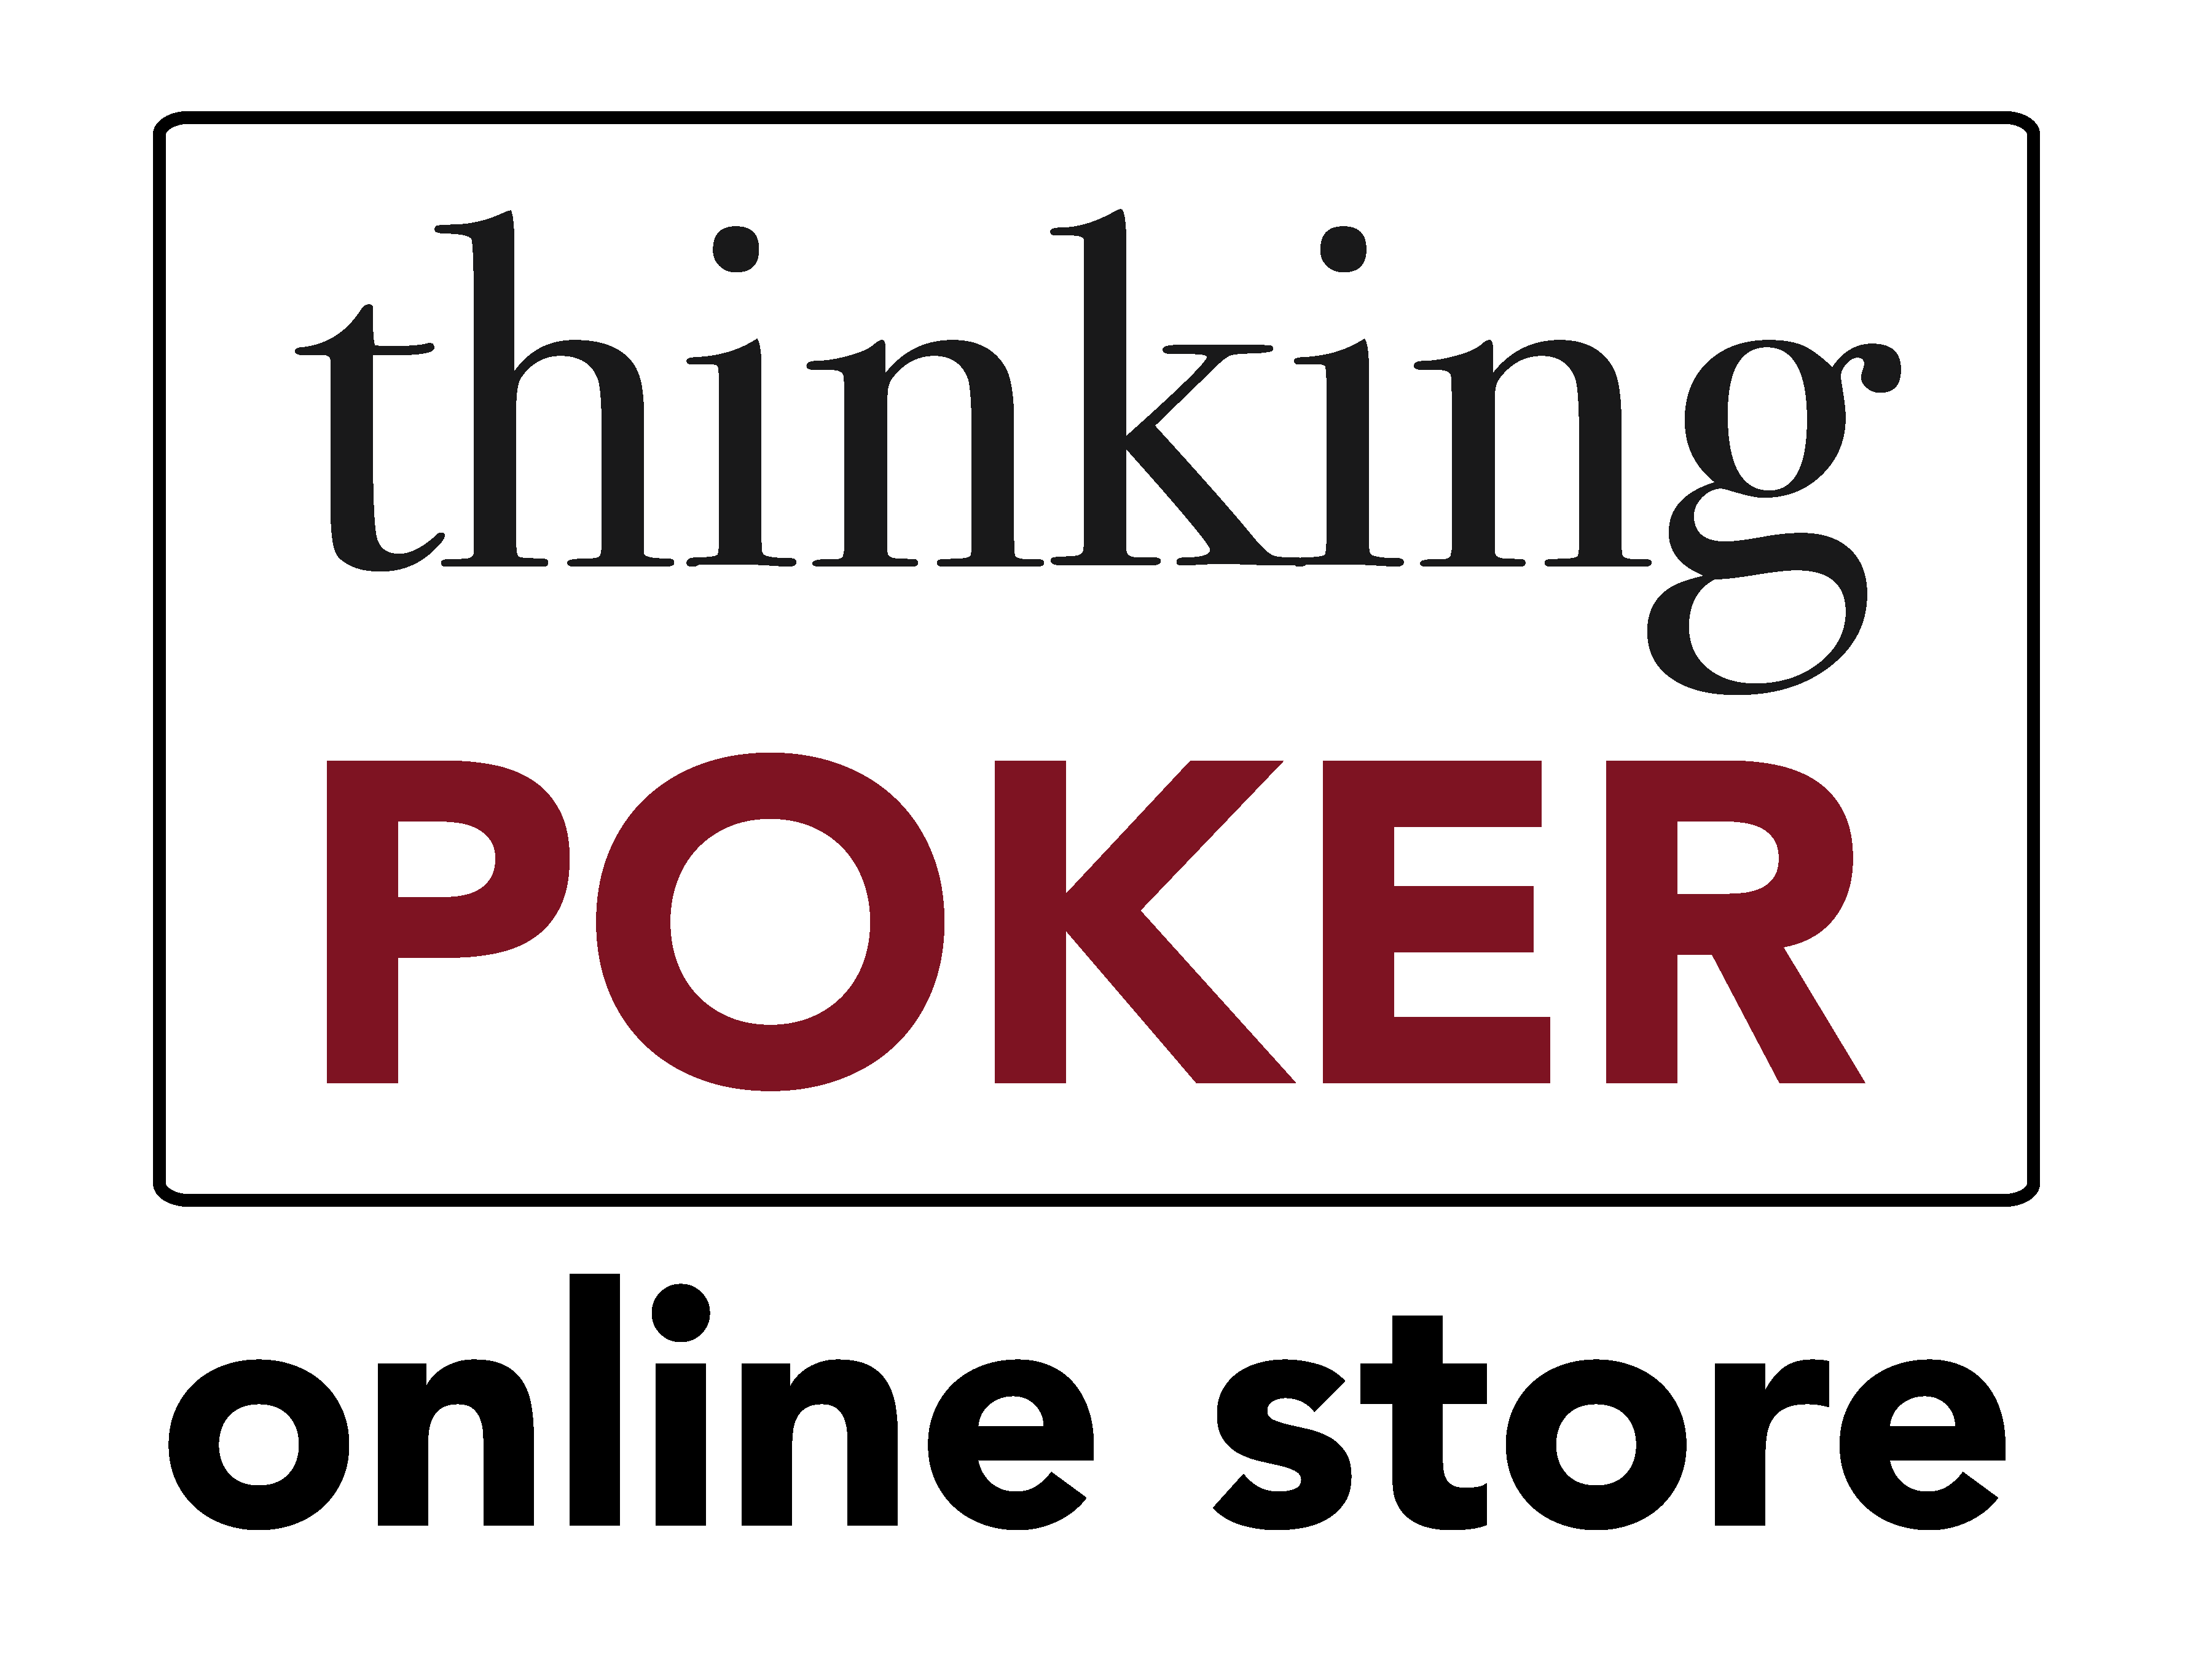 thinking-poker-online-store-clear